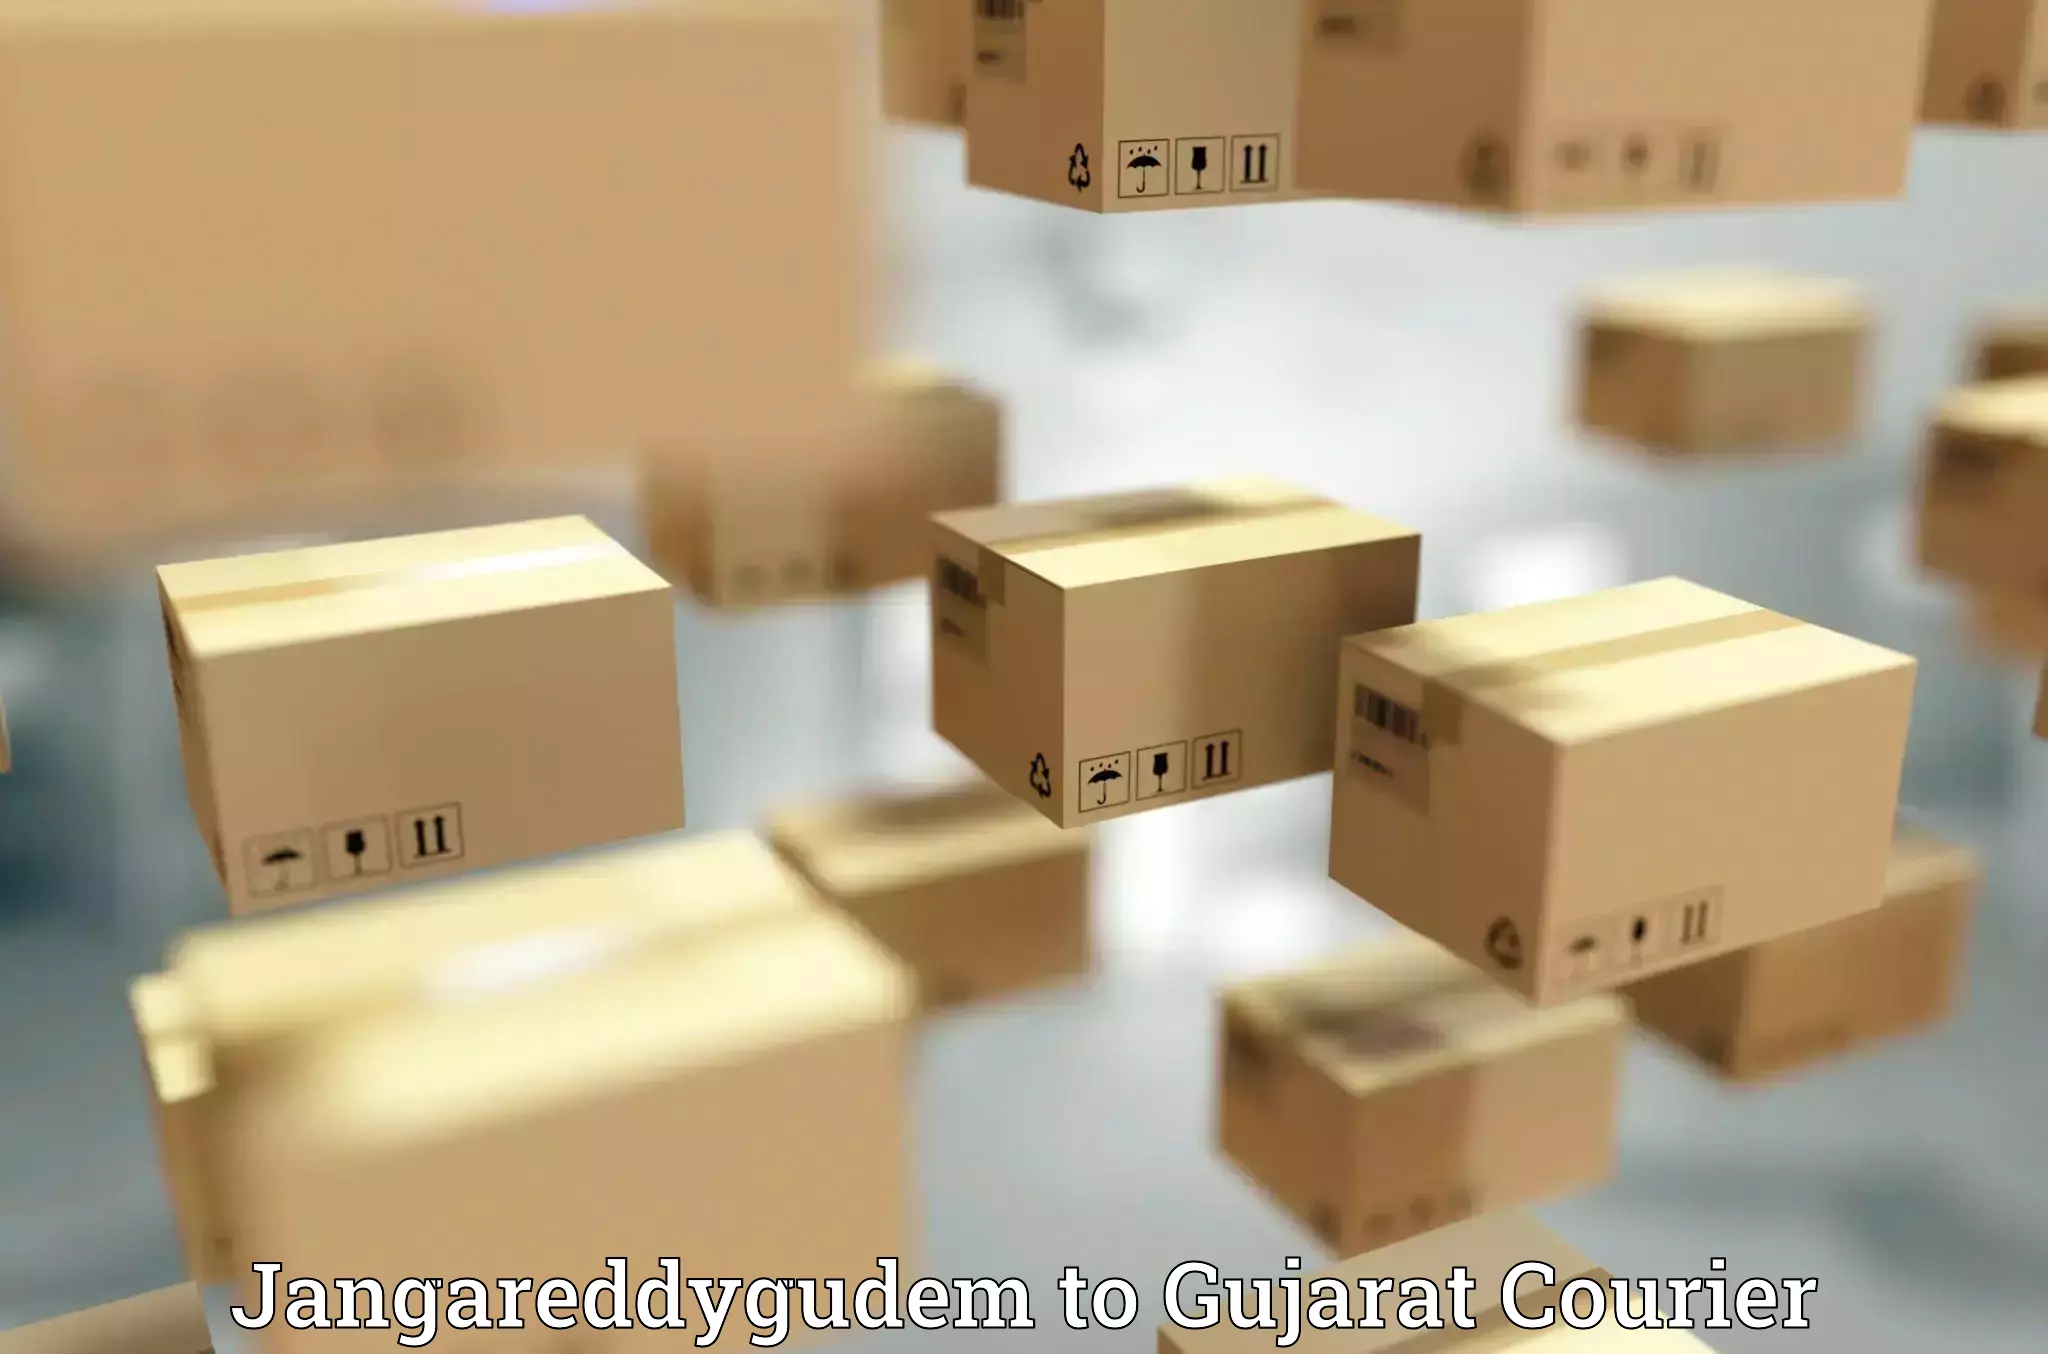 Pharmaceutical courier Jangareddygudem to Anand